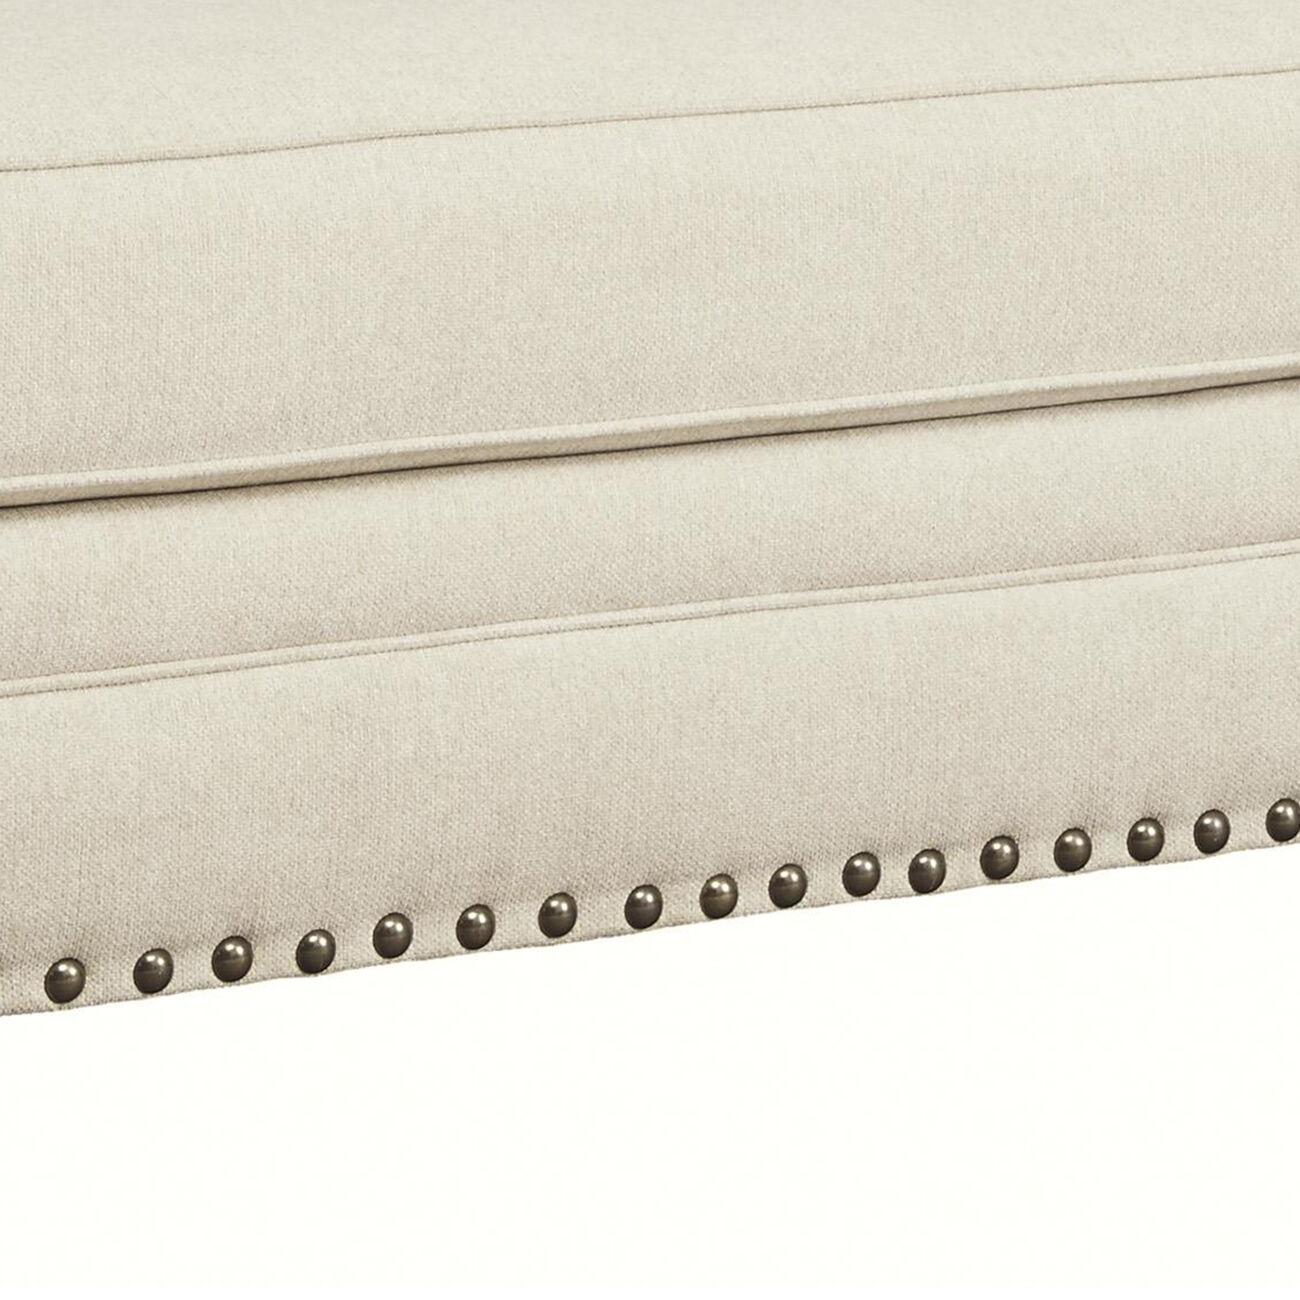 Wooden Ottoman with Nailhead Trims and Bun Feet, White and Black